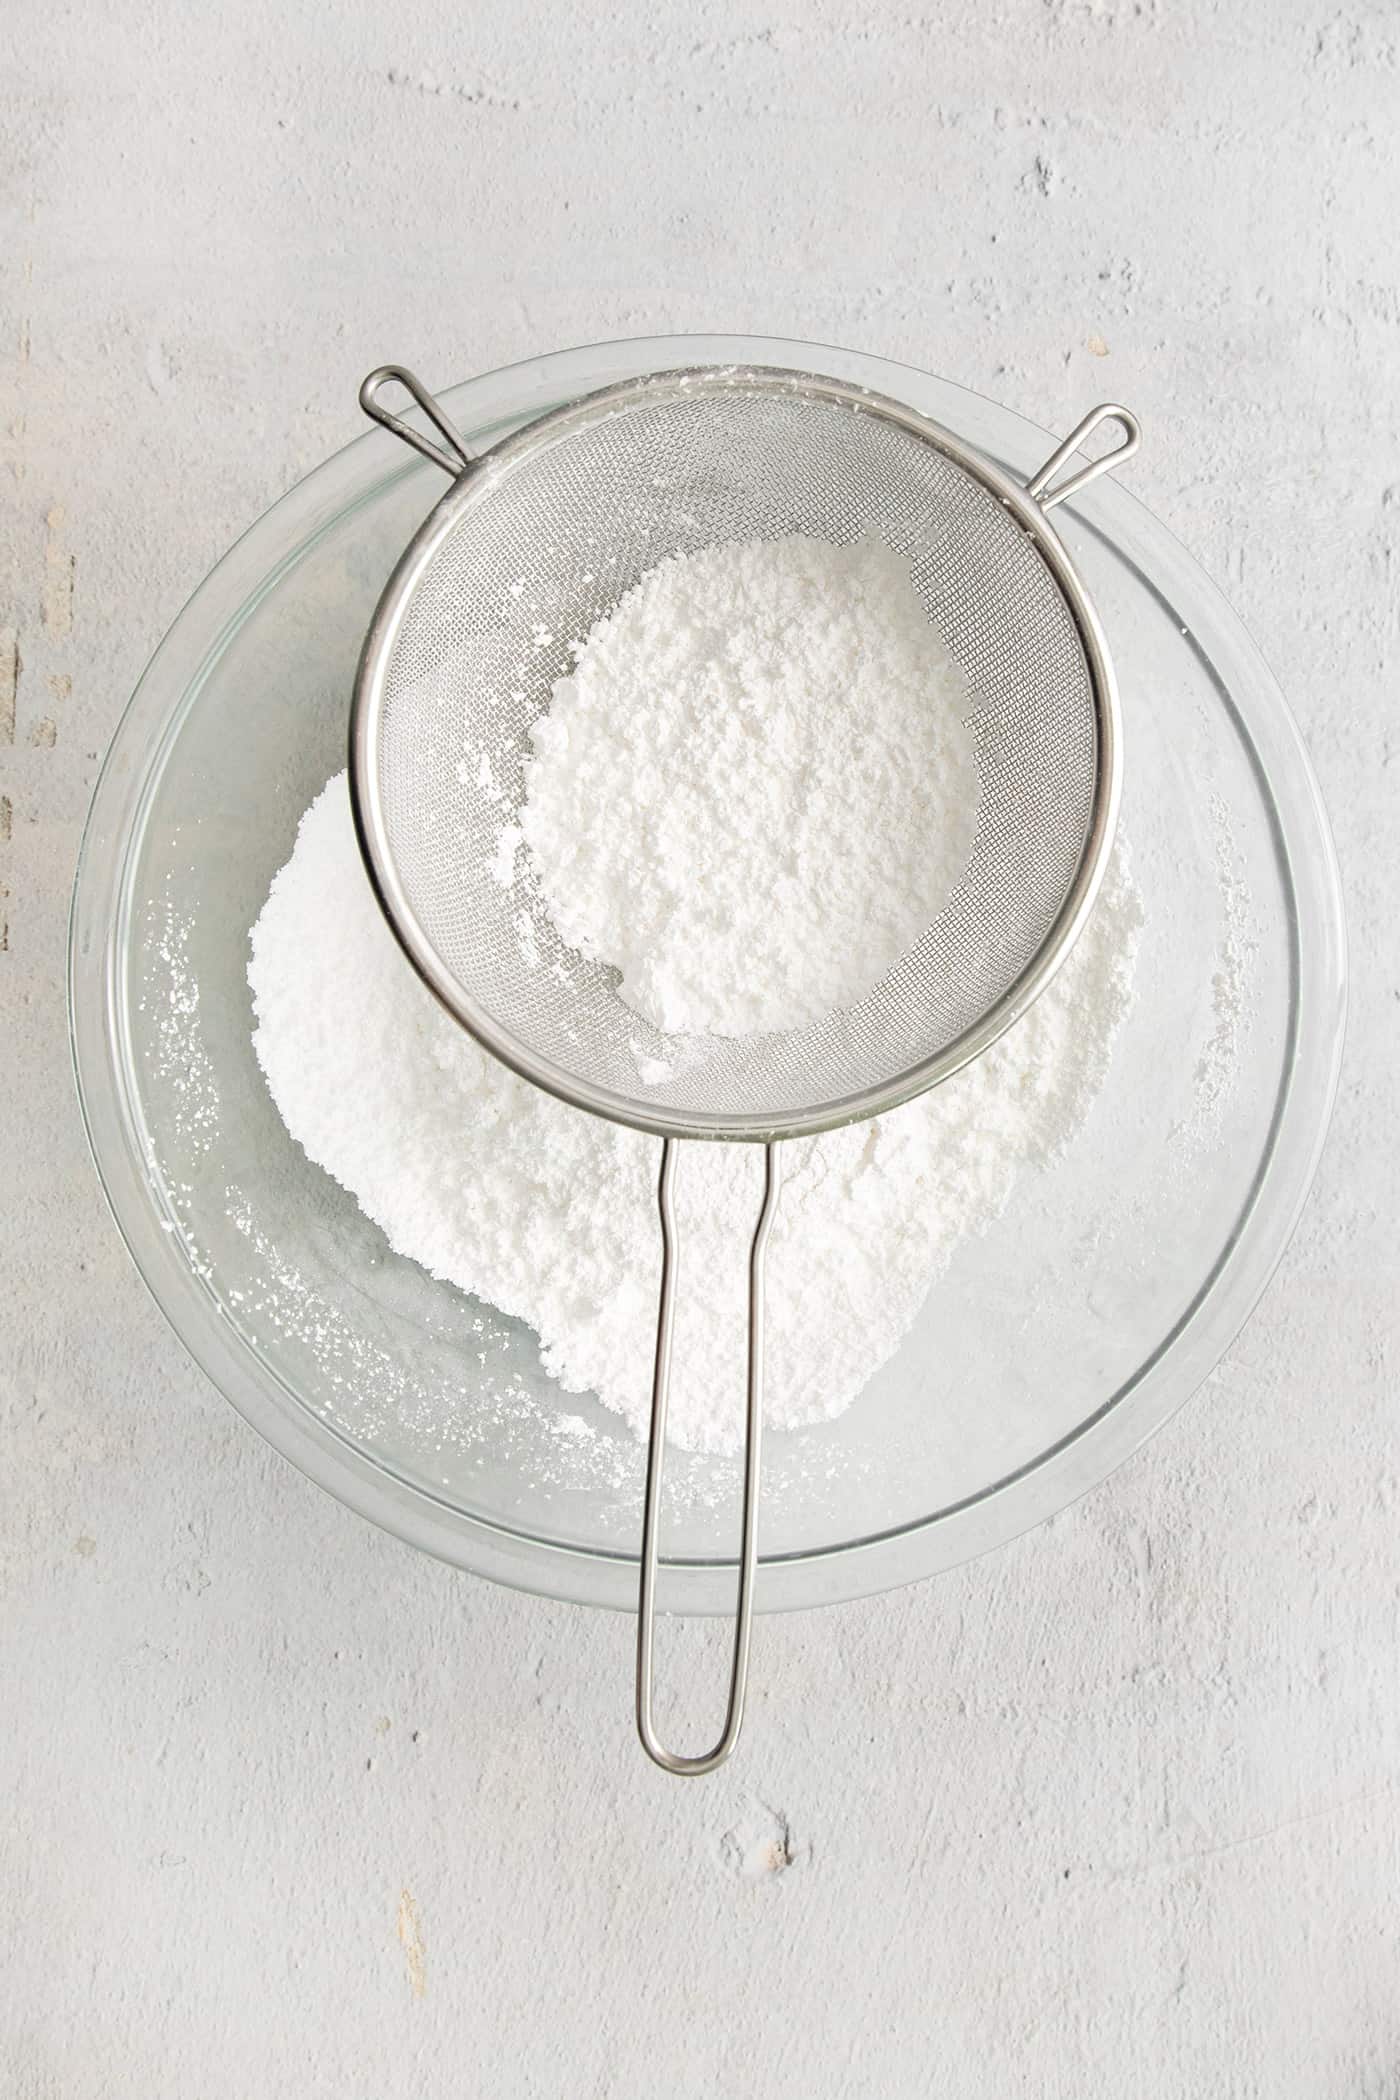 Powdered sugar being sifted into a bowl